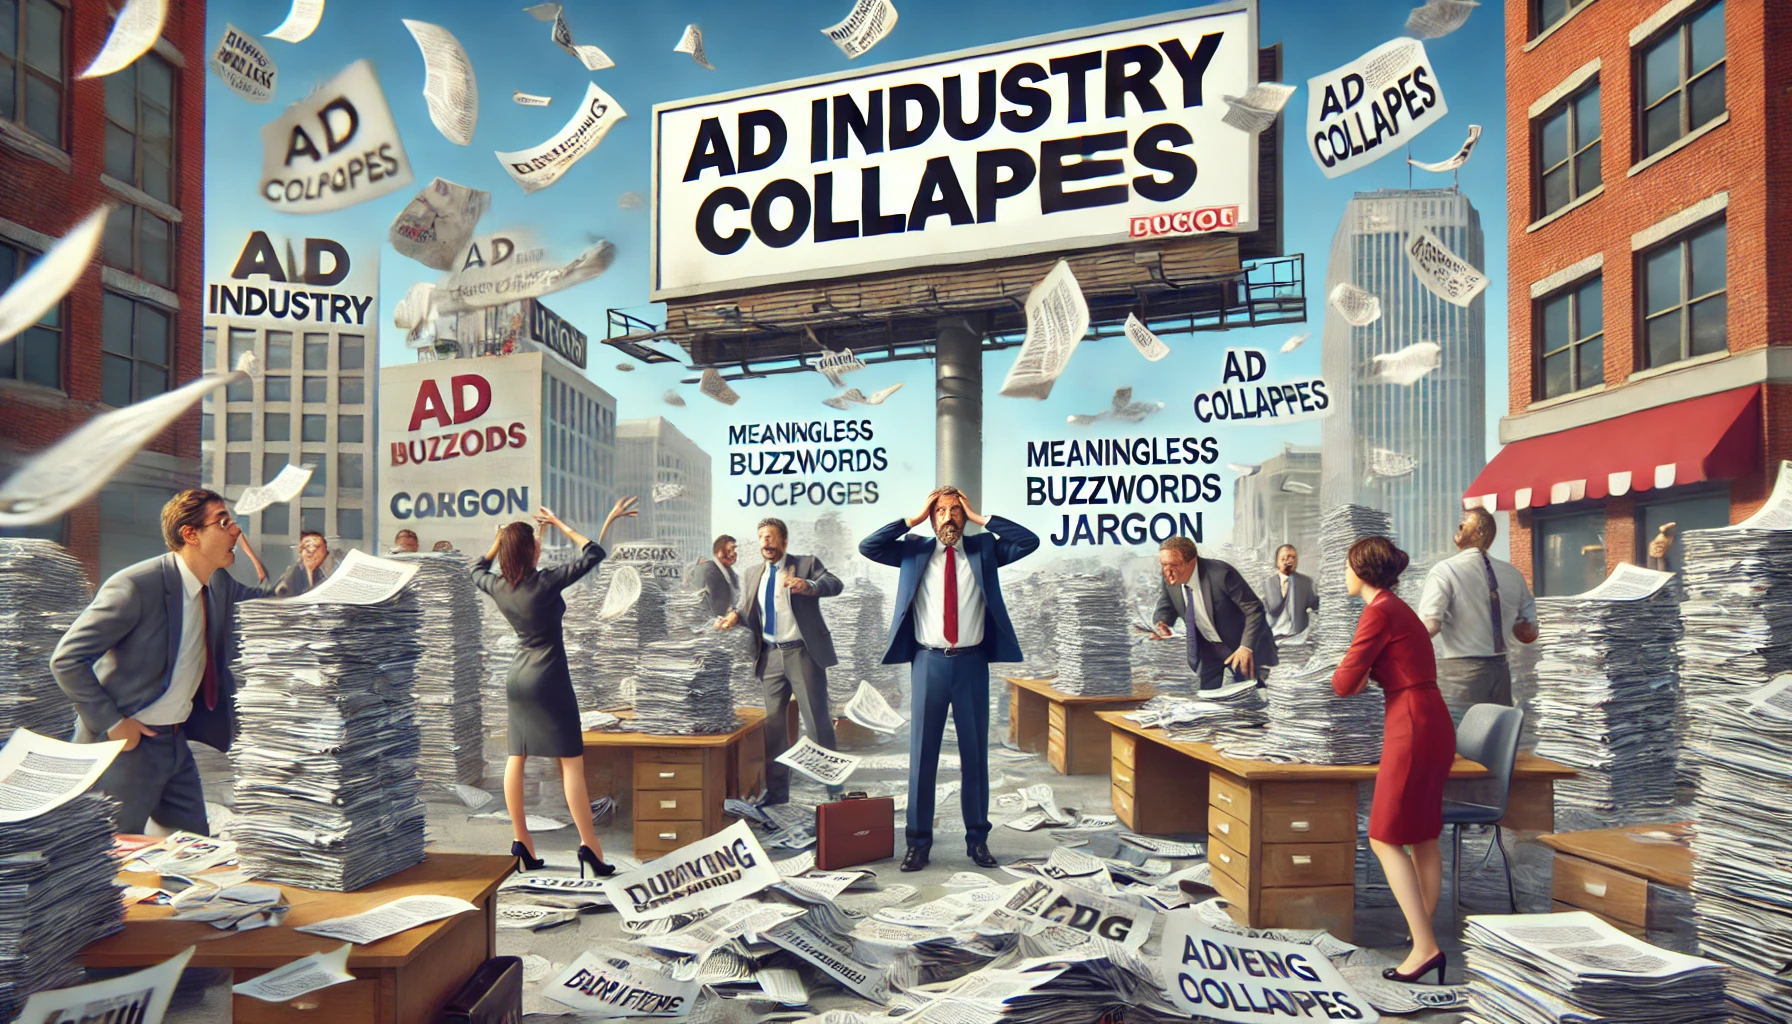 Breaking: Ad Industry Collapses Under Weight of Its Own B.S.